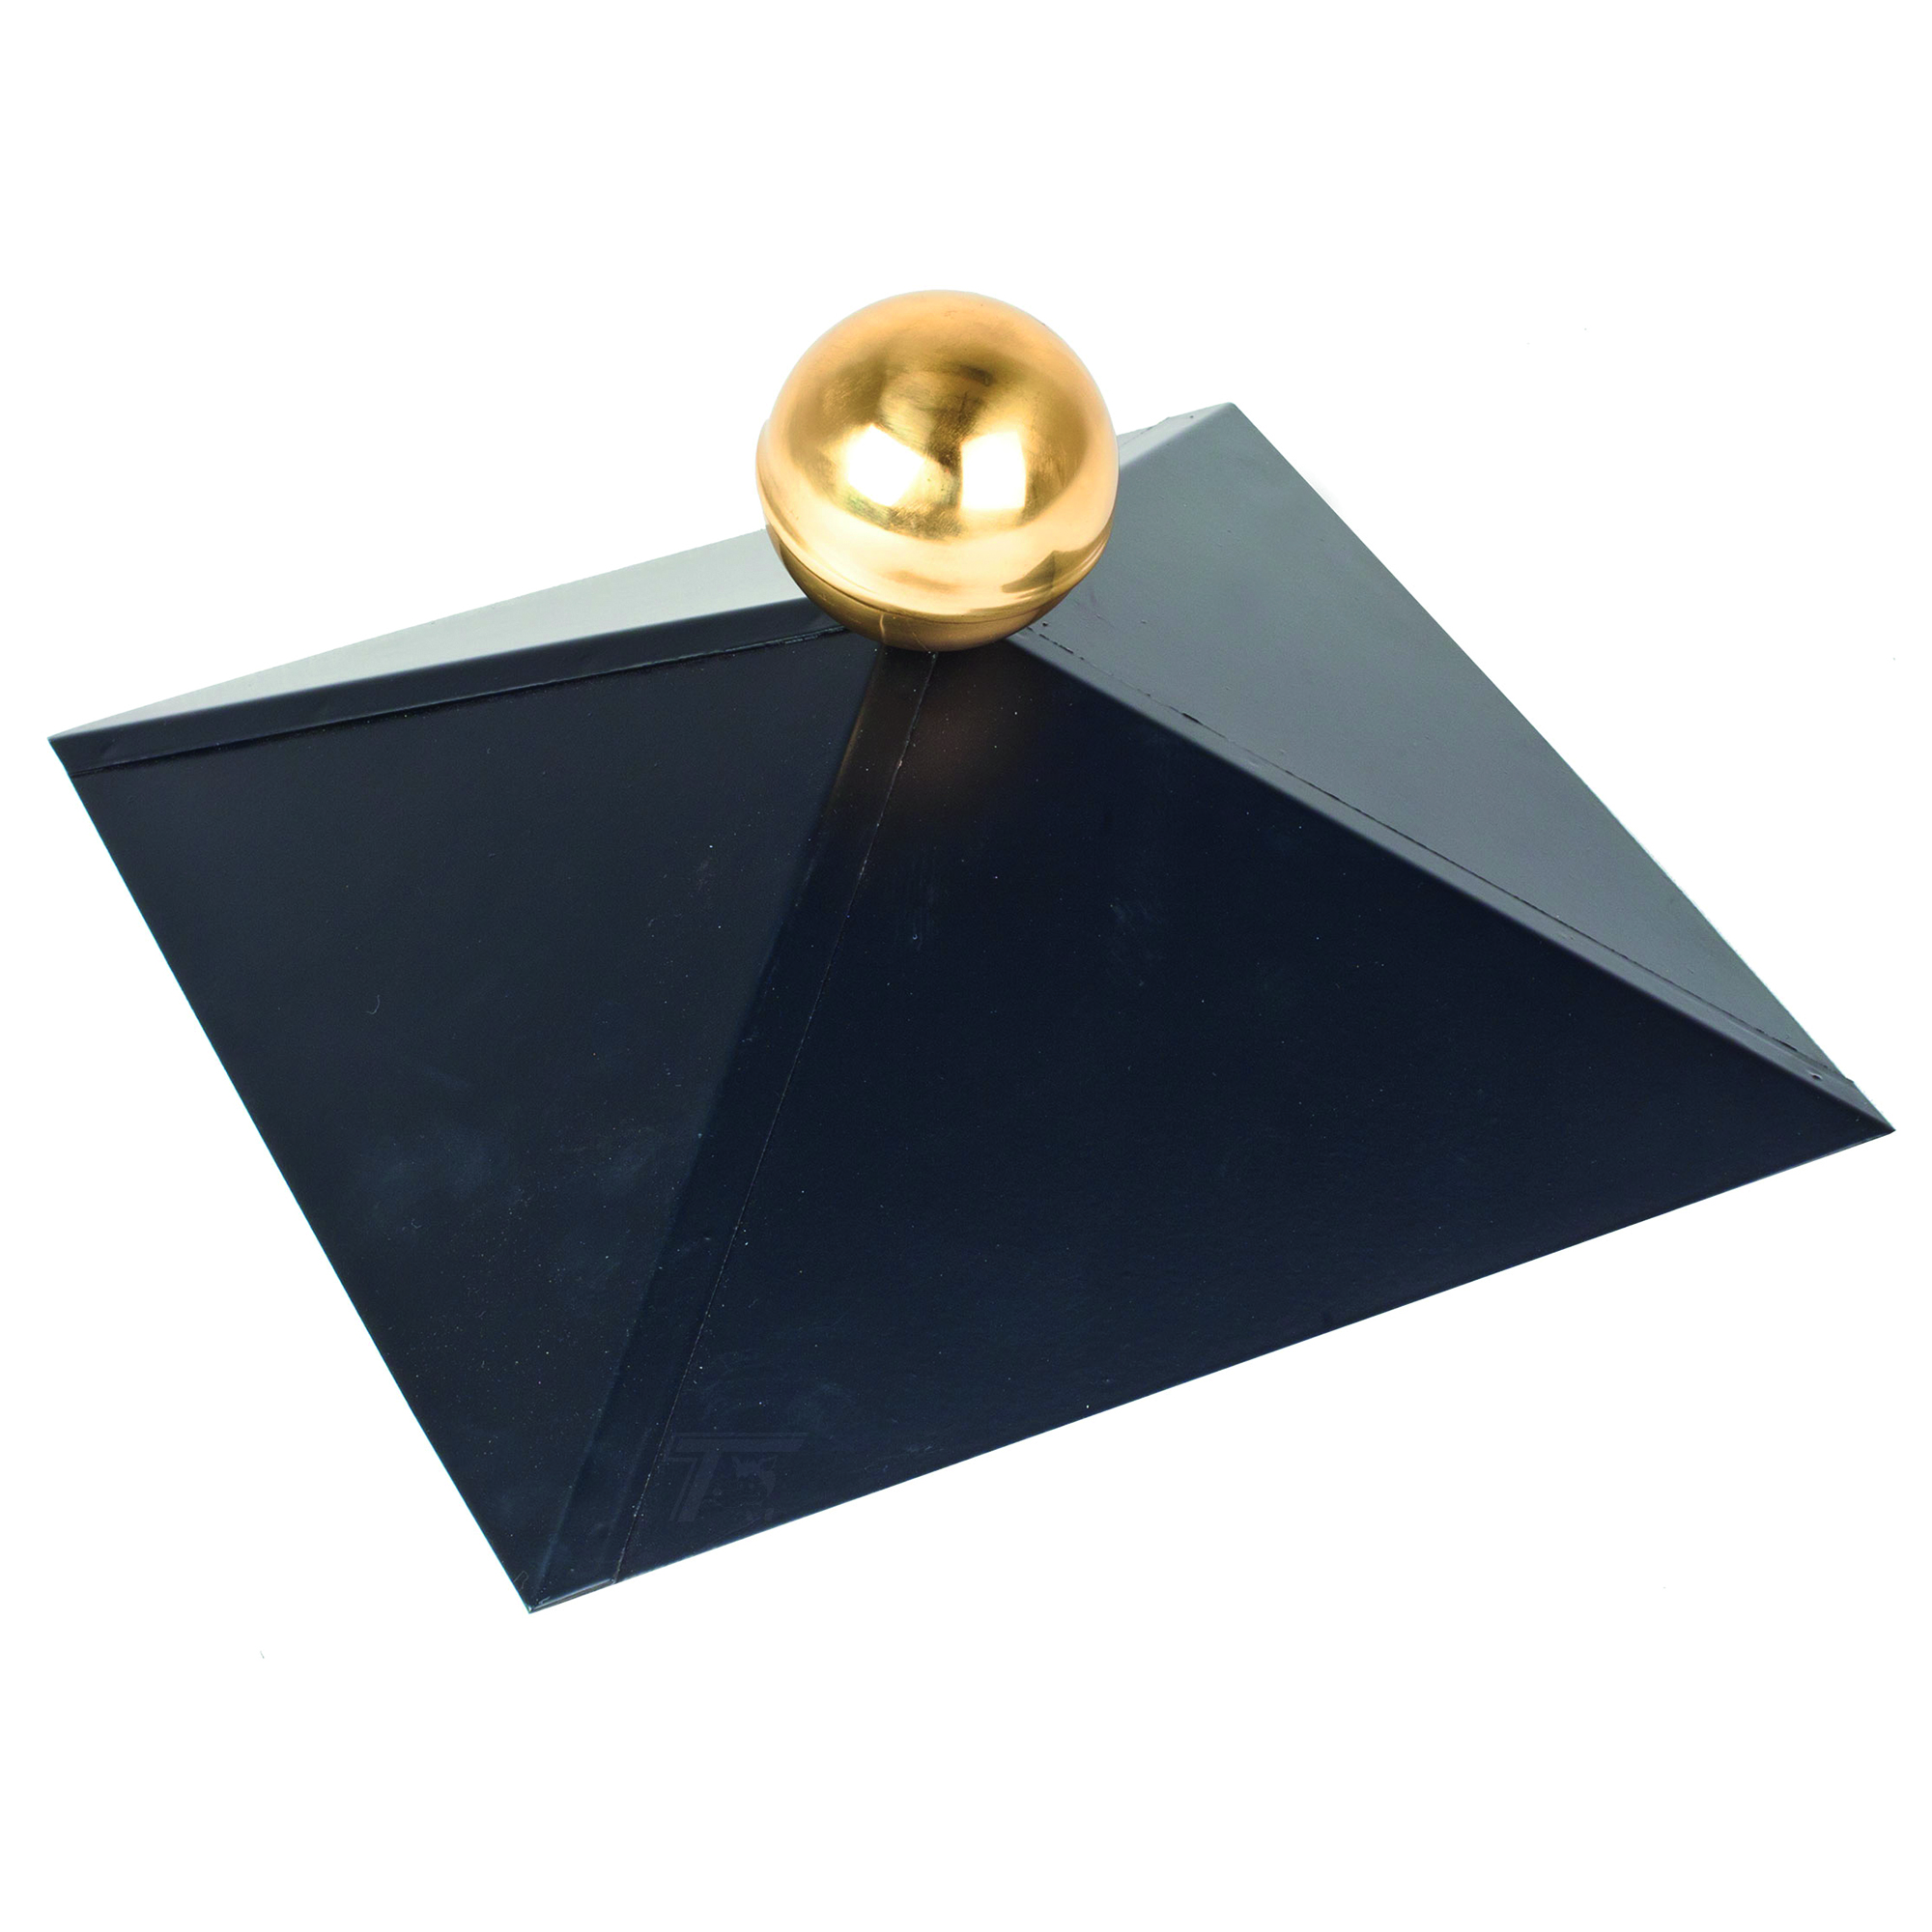 Cover cap (without brass finial) for square roof